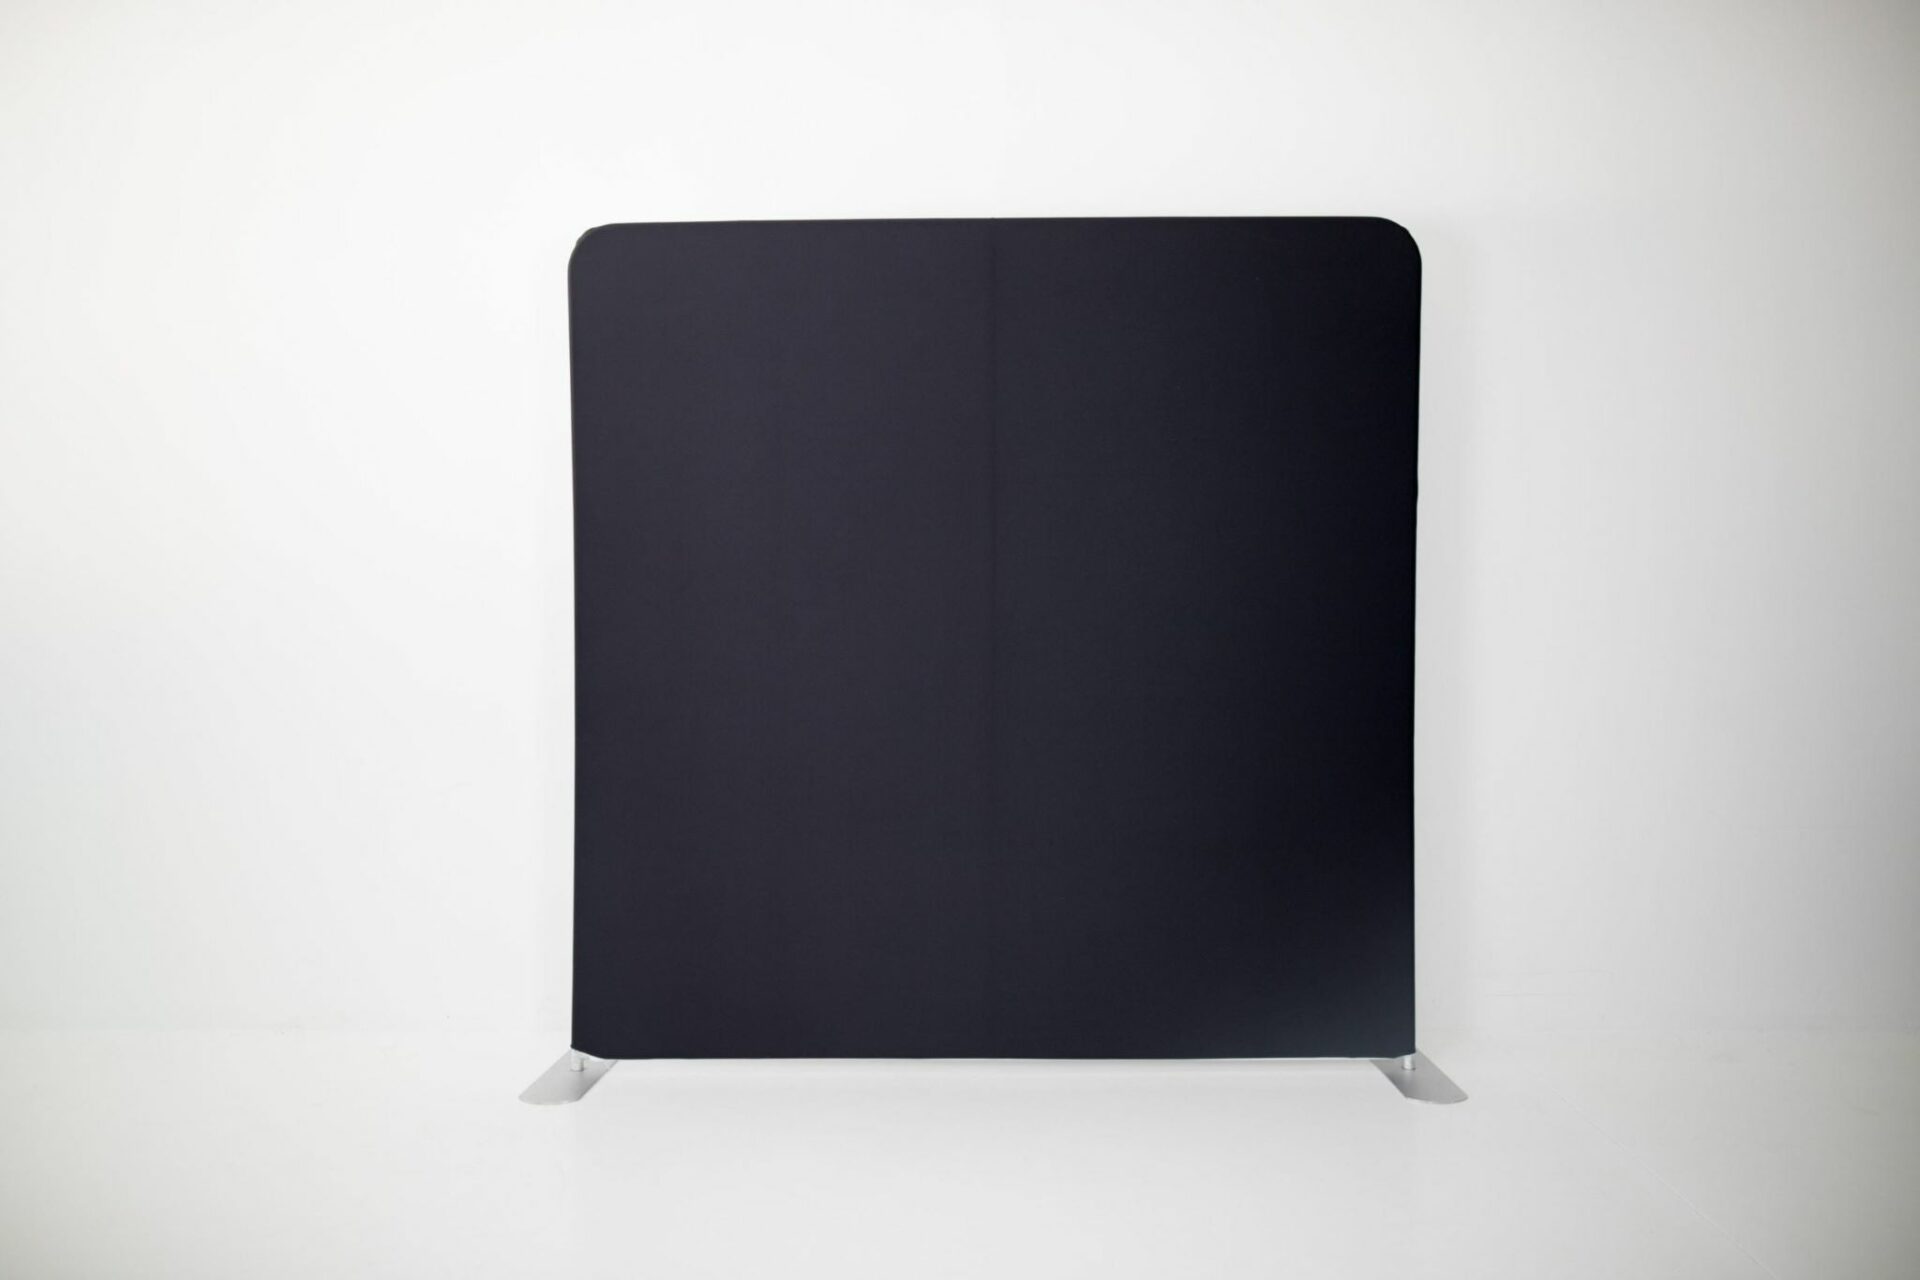 A black fabric screen on a white background.